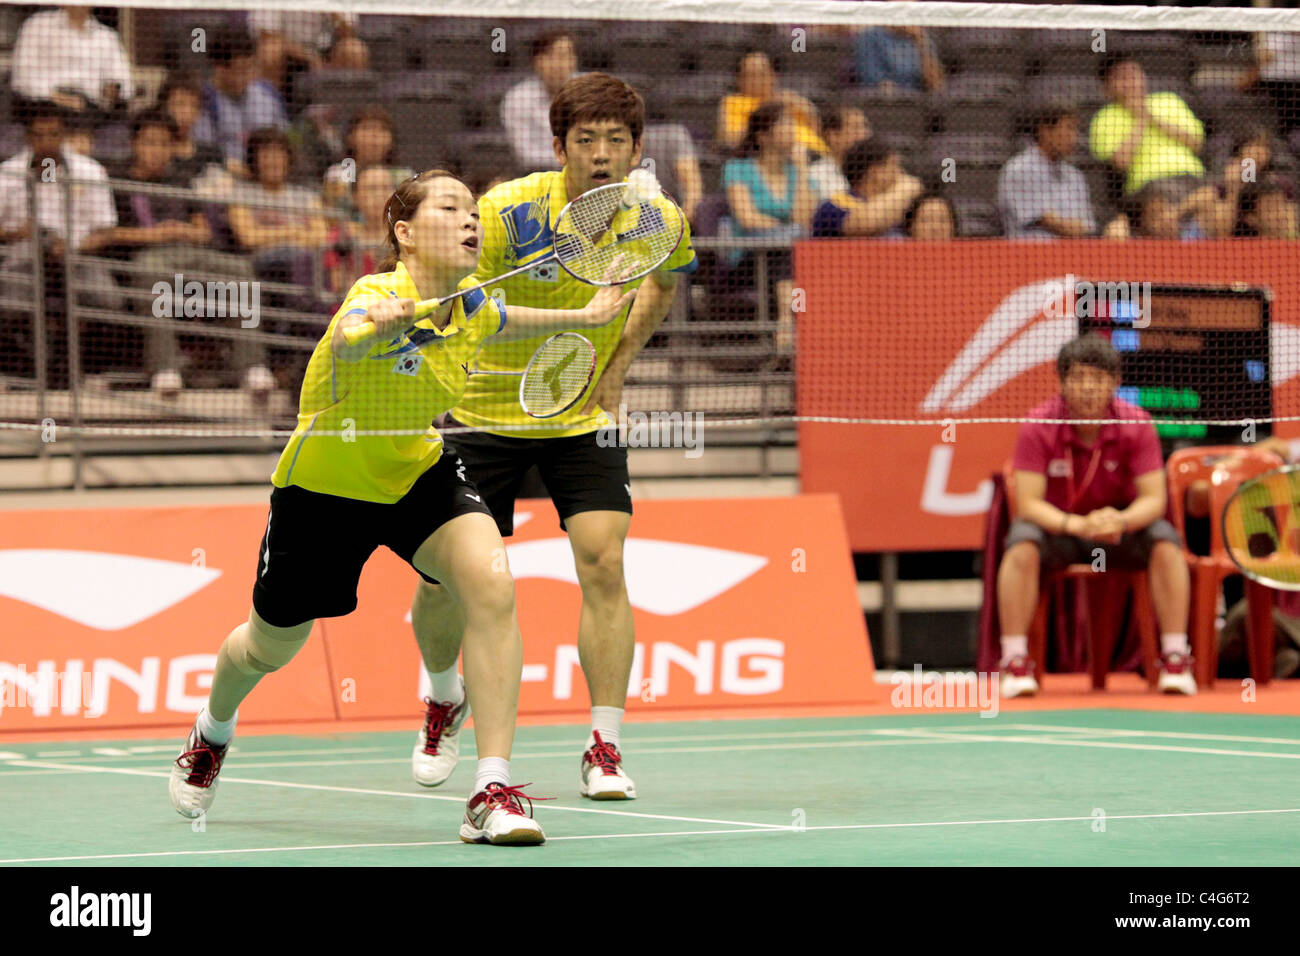 Ha Jung Eun and Lee Yong Dae of Korea during the Mixed Doubles Round 1 of the Li-Ning Singapore Open 2011. Stock Photo